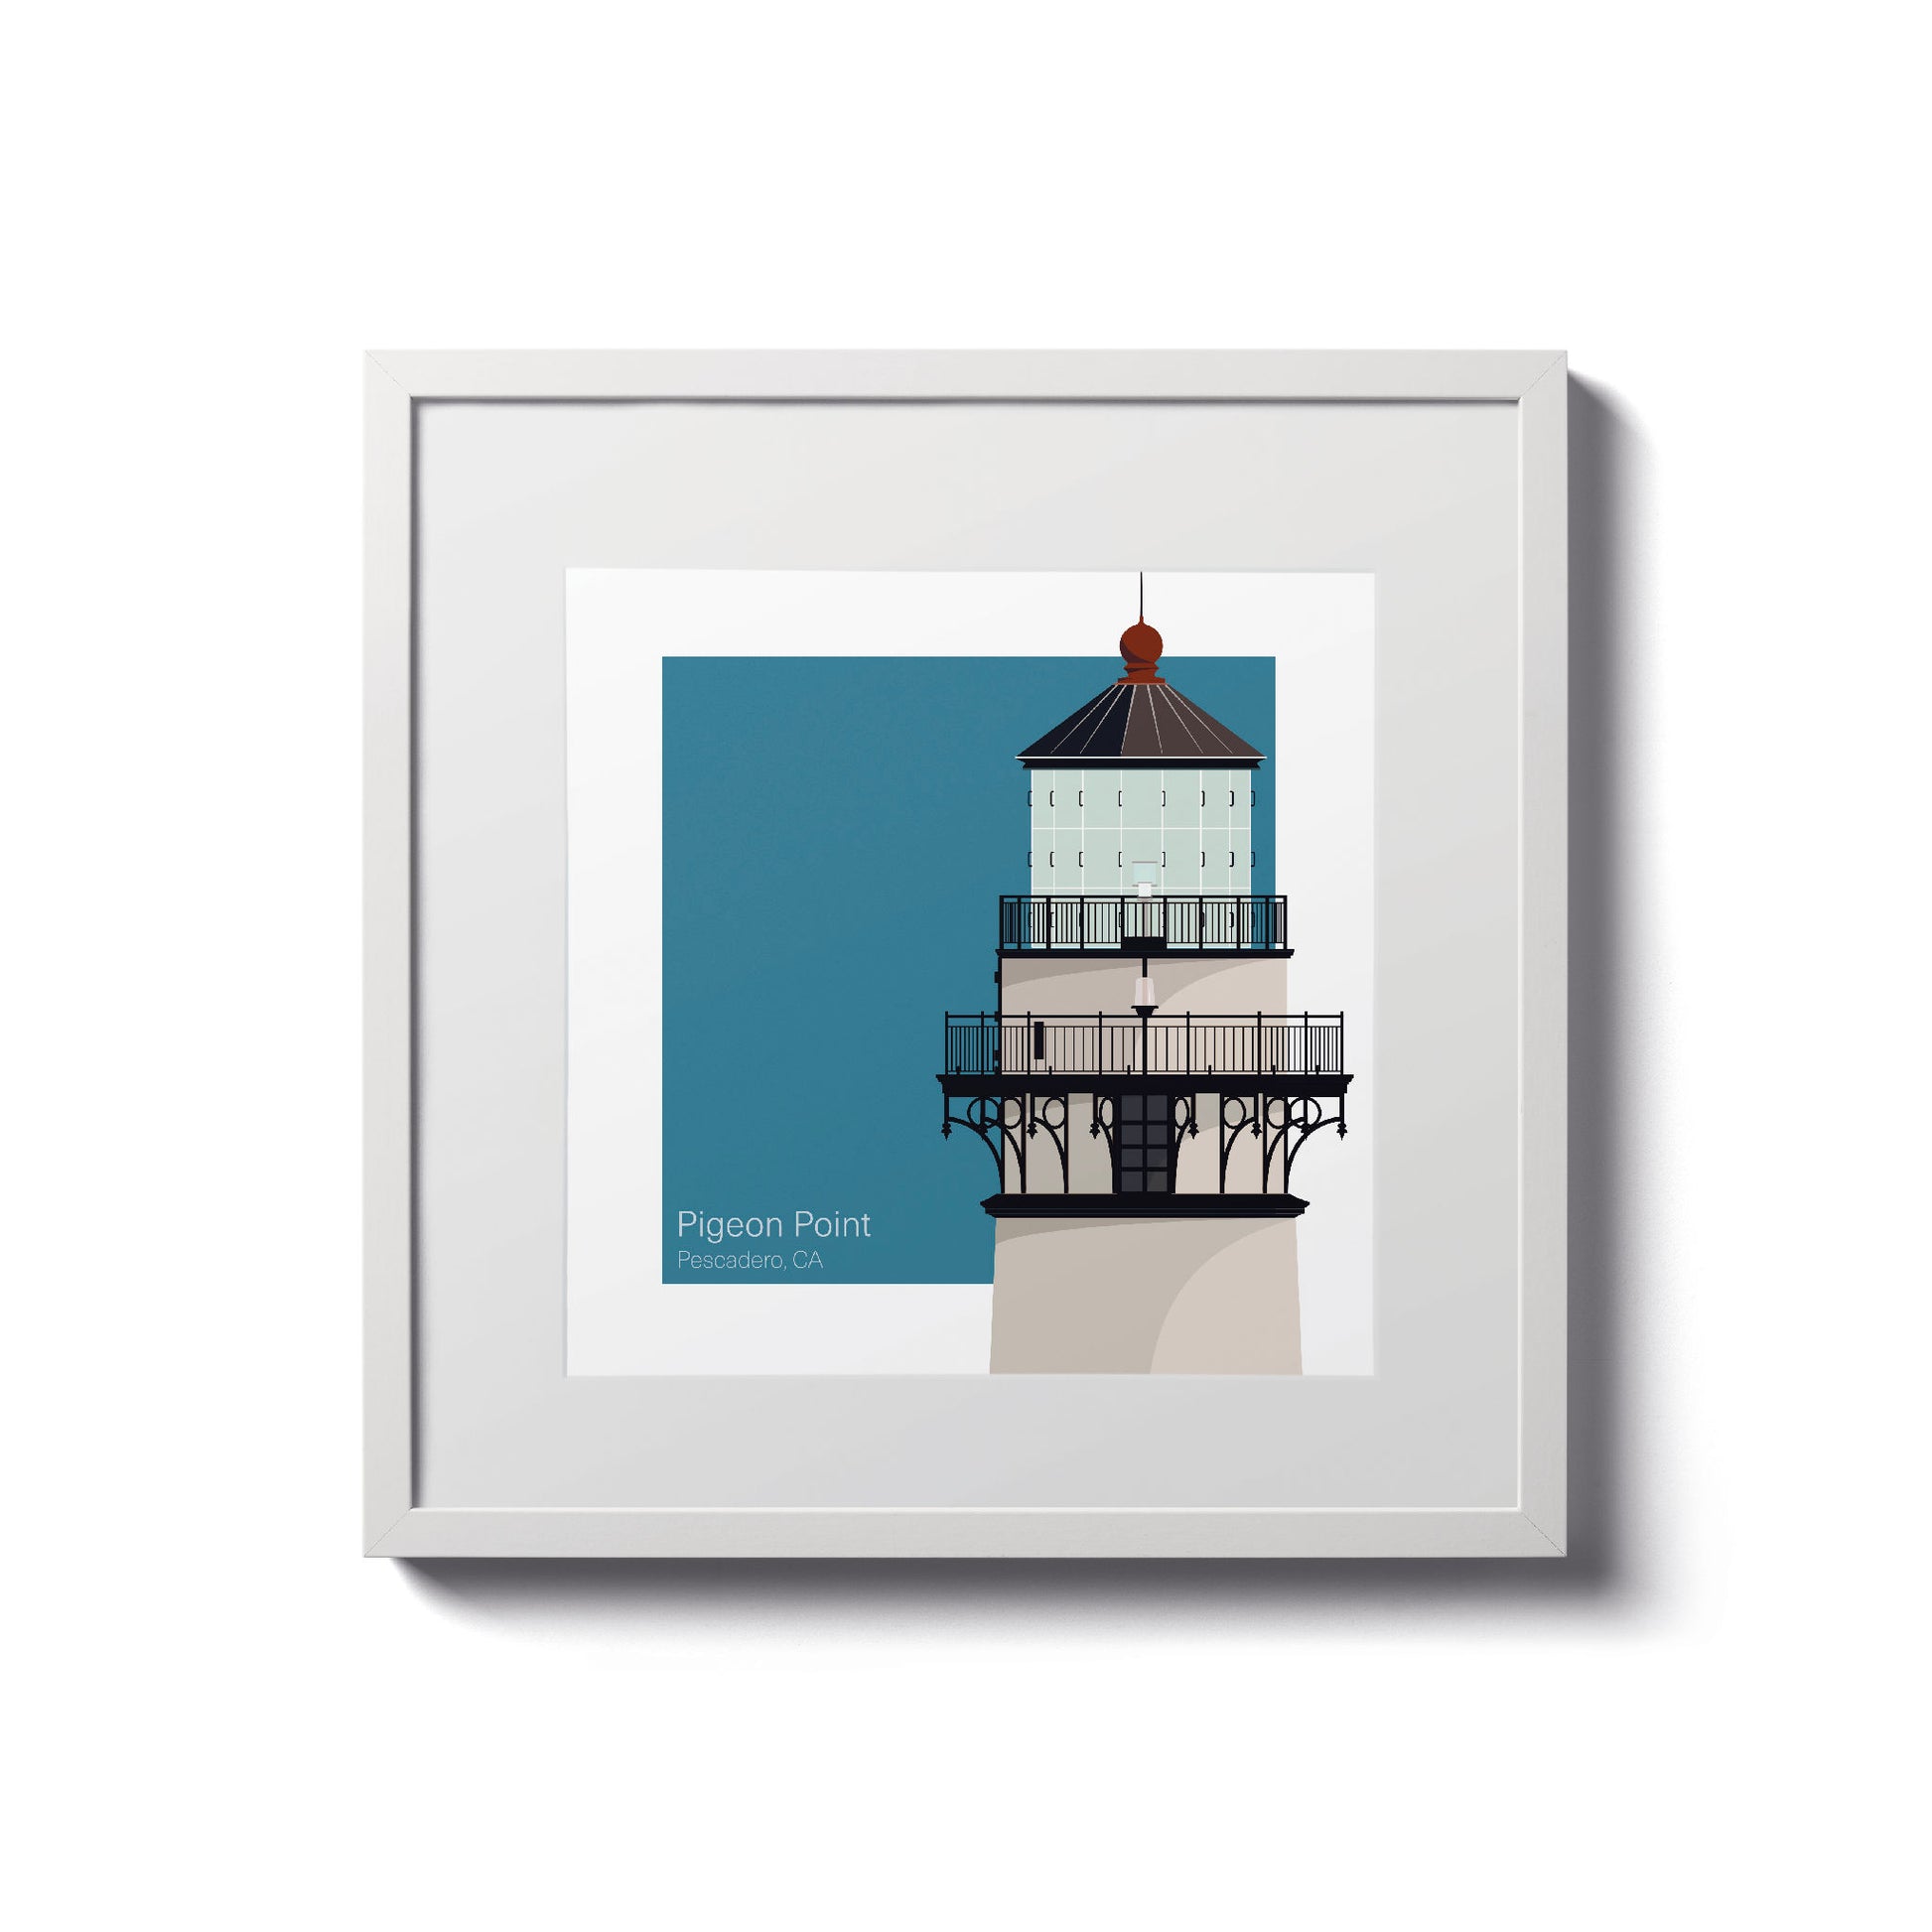 Illustration of the Pigeon Point lighthouse, CA, USA. On a white background with aqua blue square as a backdrop., in a white frame  and measuring 8"x8" (20x20cm).